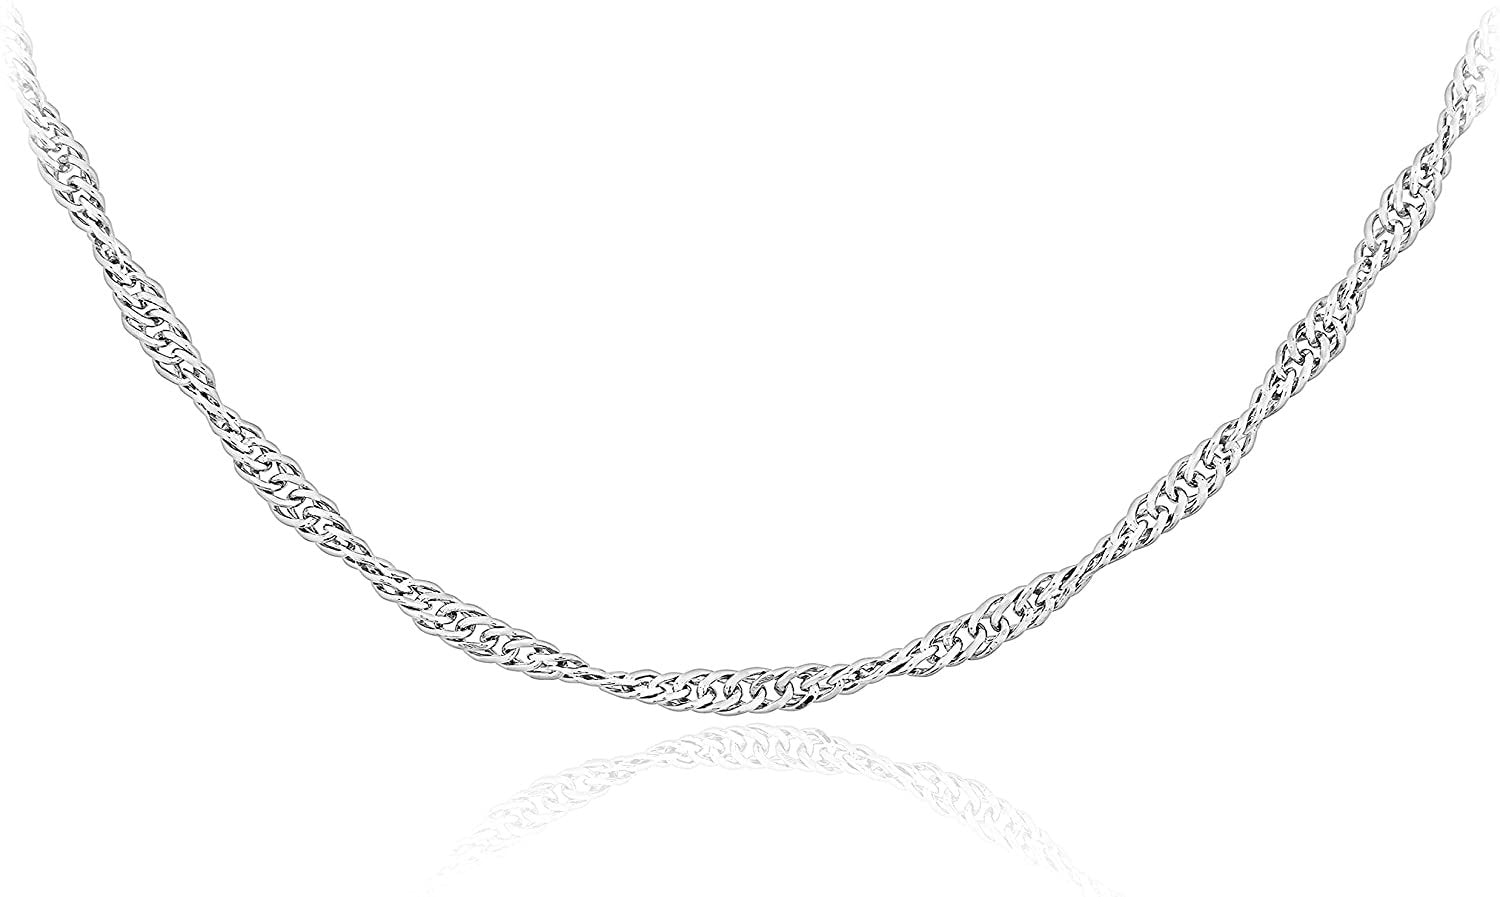 .925 Sterling Silver Singapore Chain Adjustable Length 16" - 18"